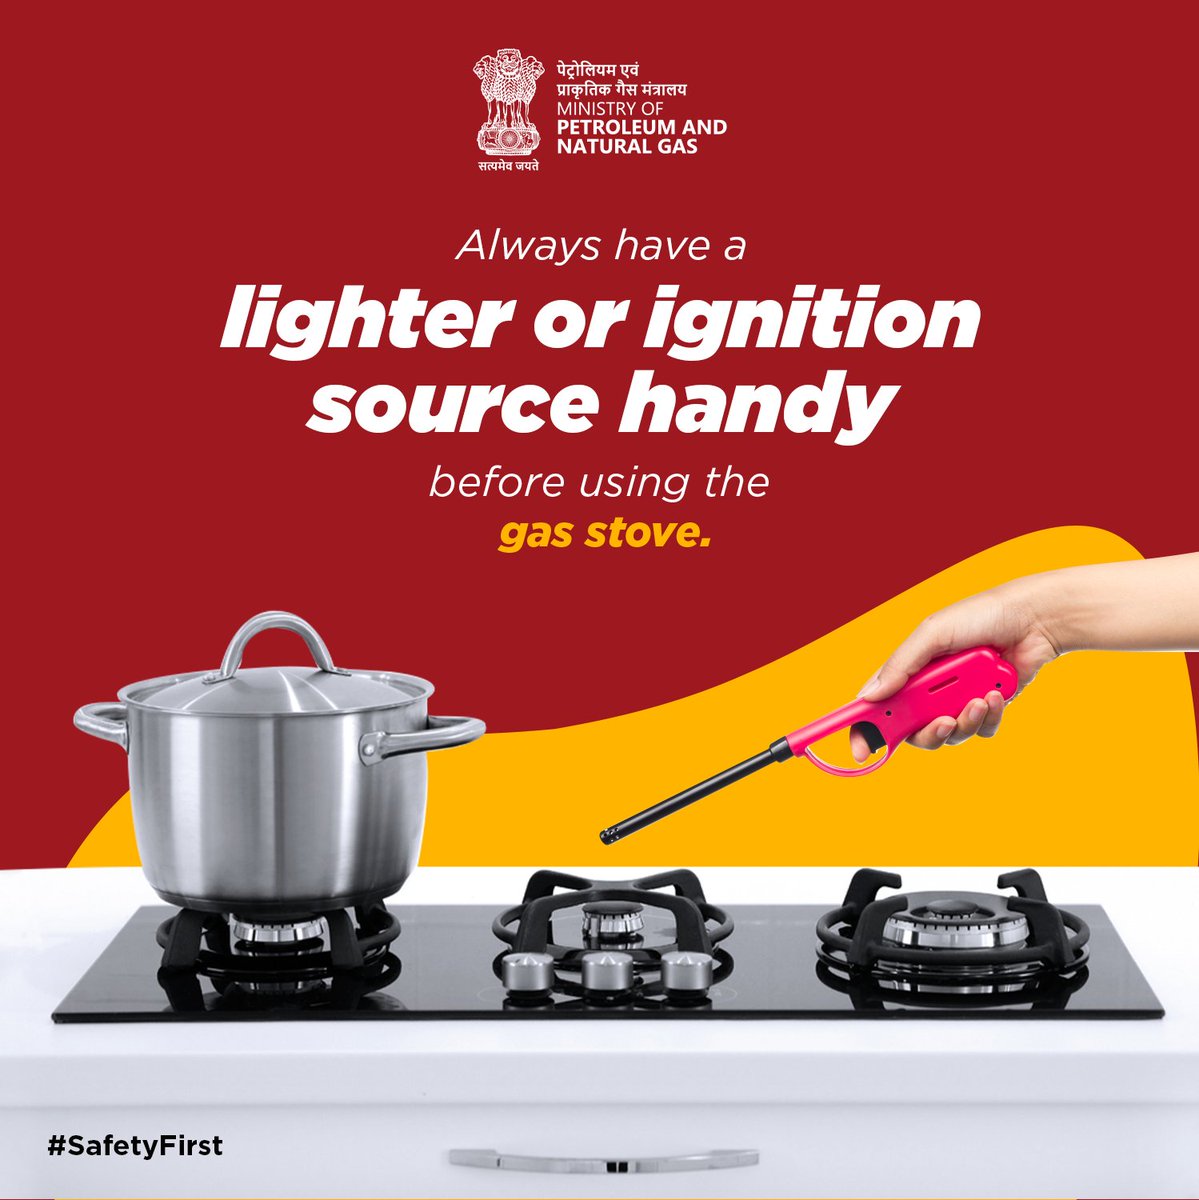 Safety Tip of the Day! Before cooking, always ensure you have a lighter or ignition source at hand for your gas stove. It's a small step that can make a big difference in preventing accidents. #SafetyTip #LPGCylinder #SafetyFirst